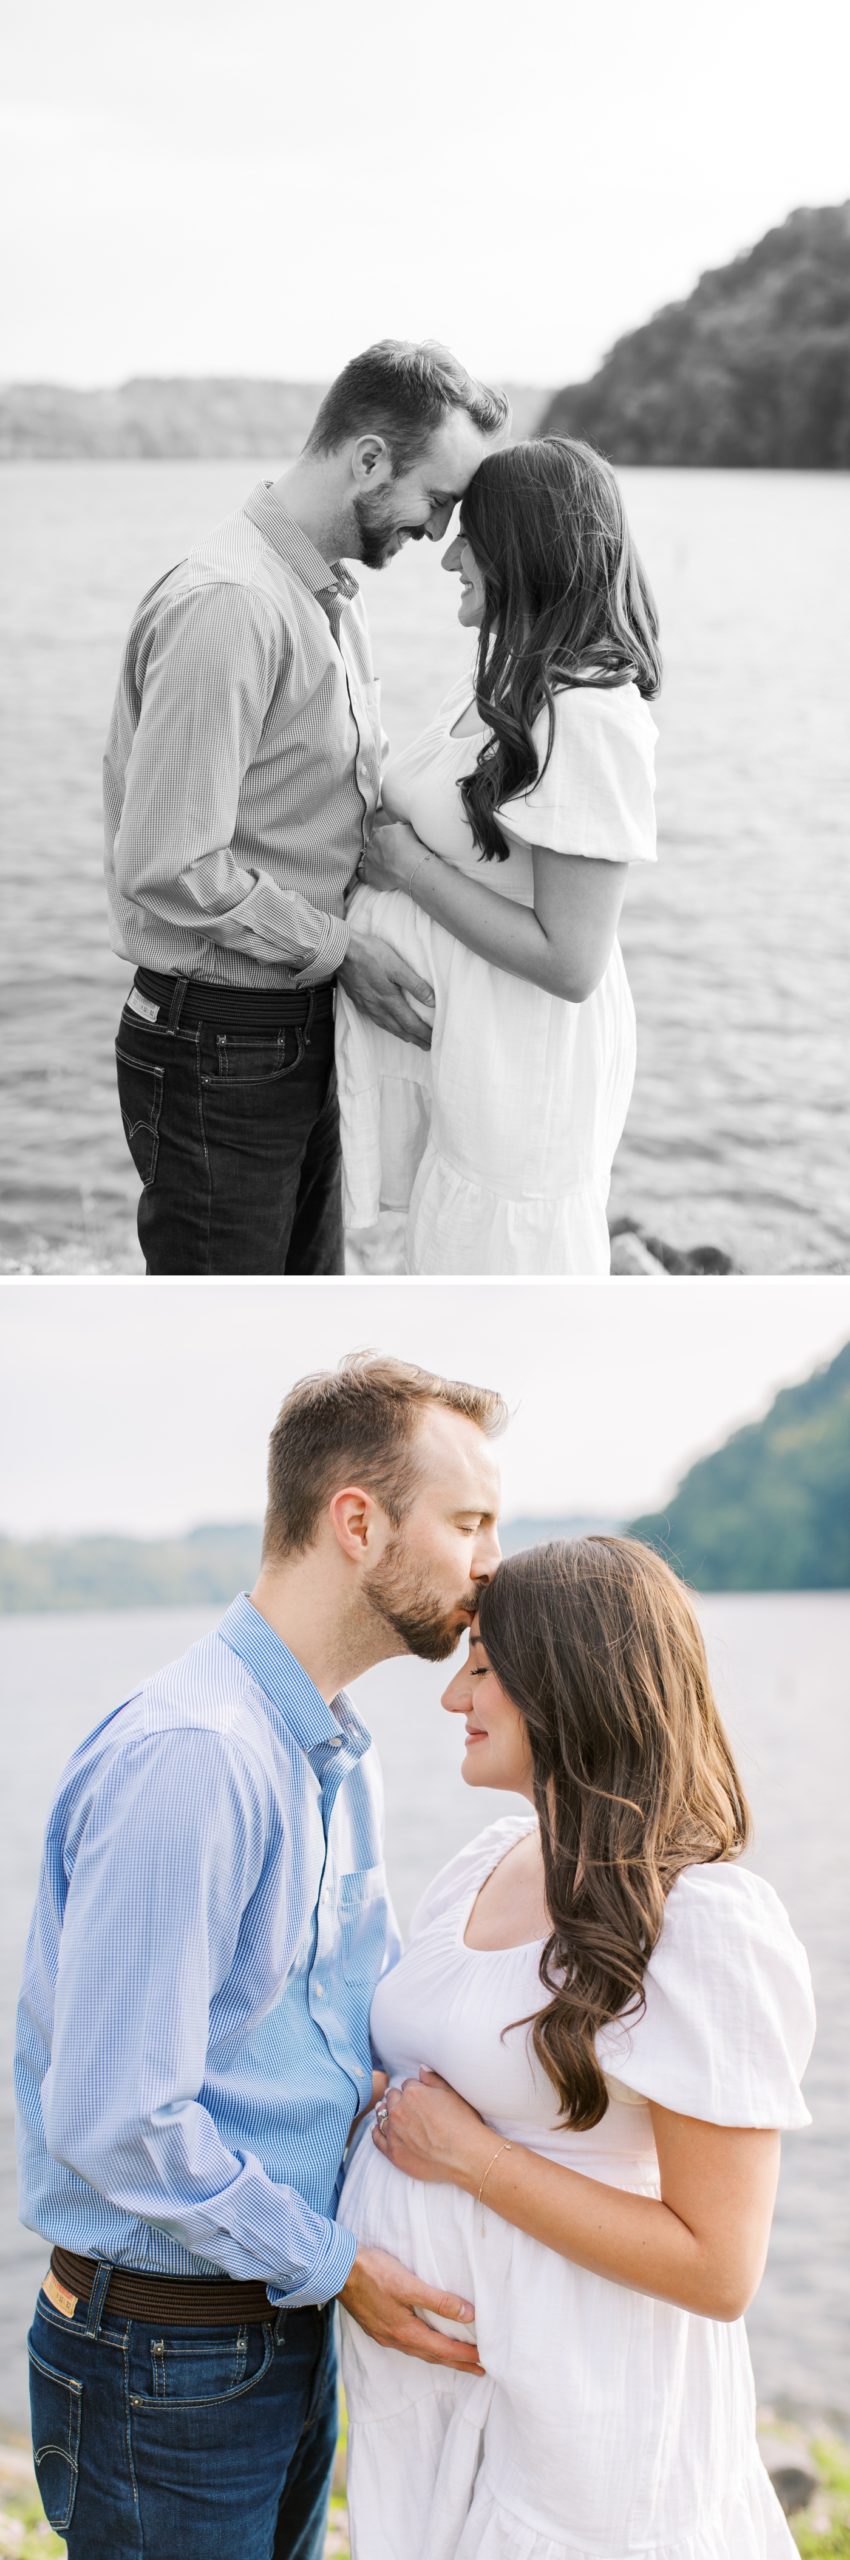 Lakeside maternity session in Morgantown